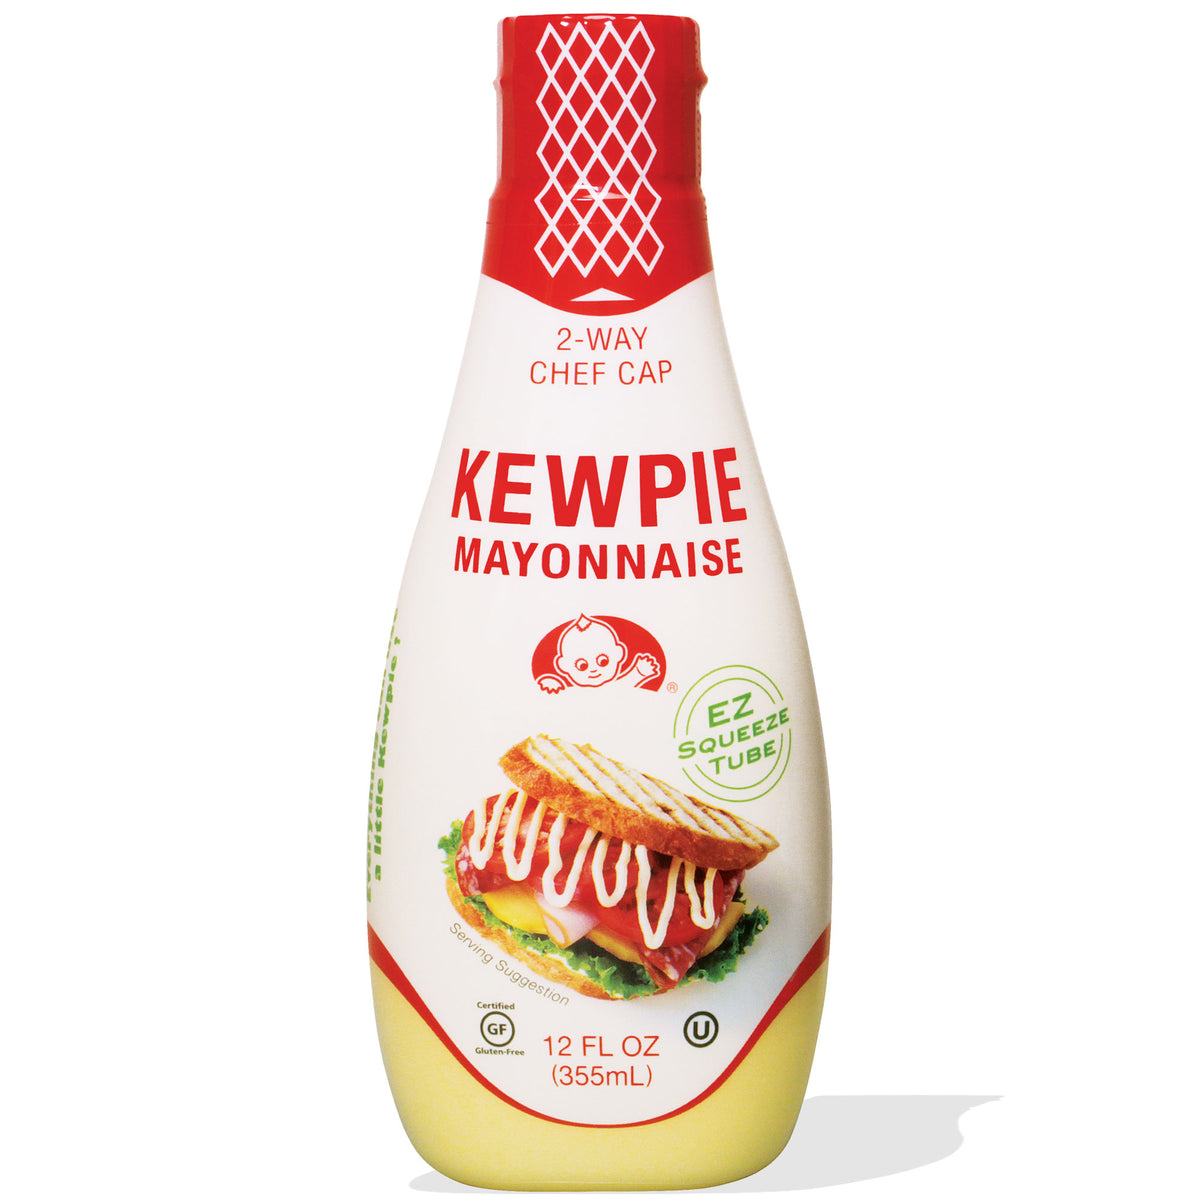 What Is Japanese Mayonnaise And How Is It Different From American Mayo?